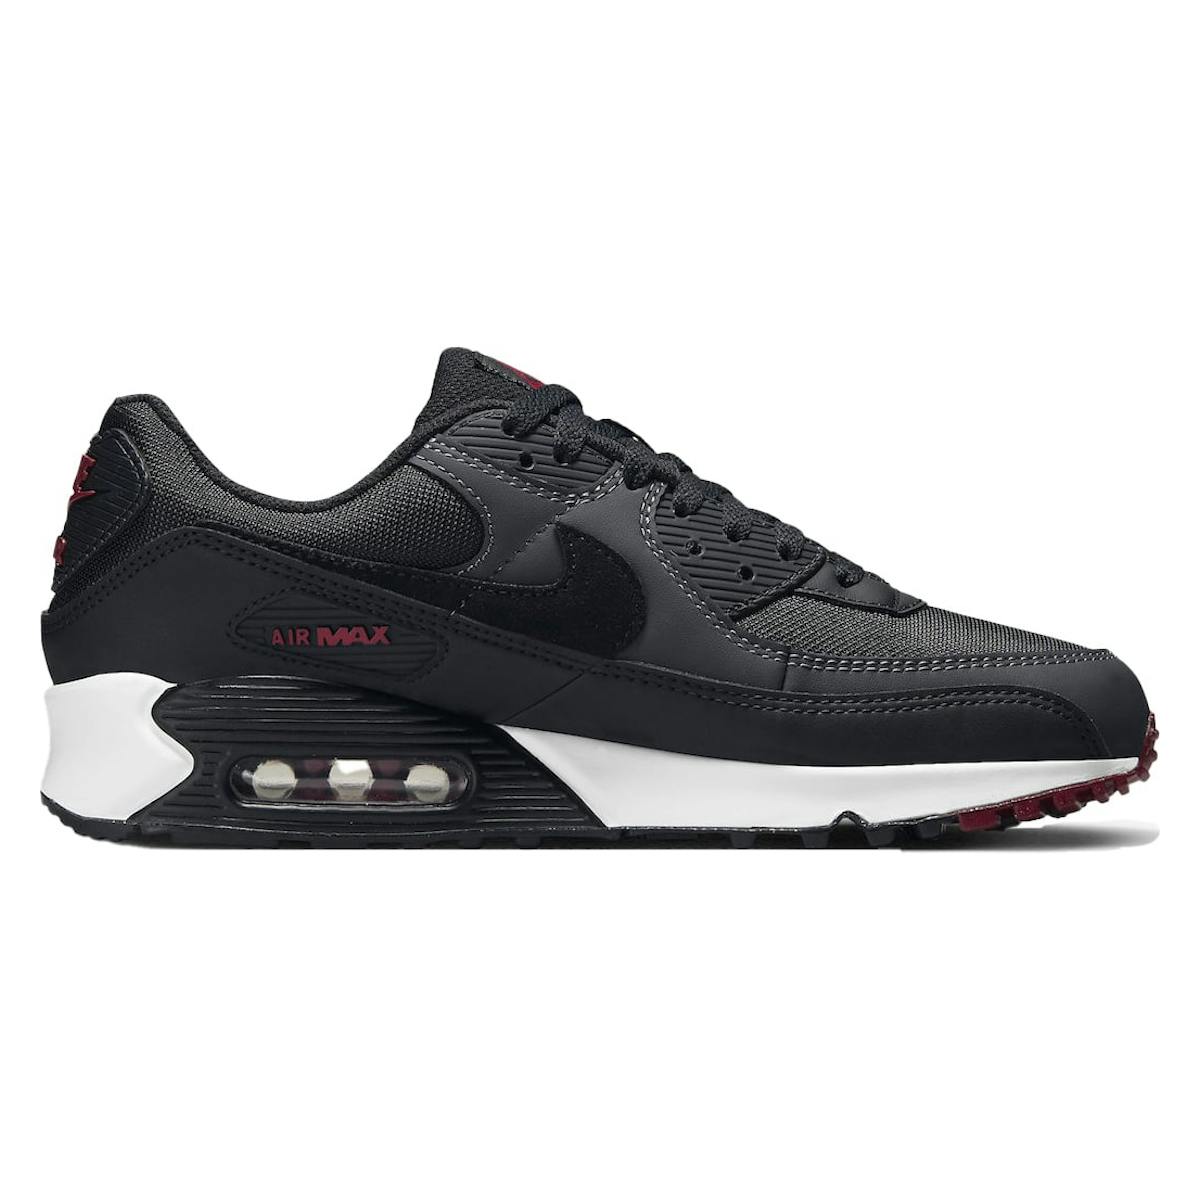 Nike Air Max 90 "Anthracite Team Red"